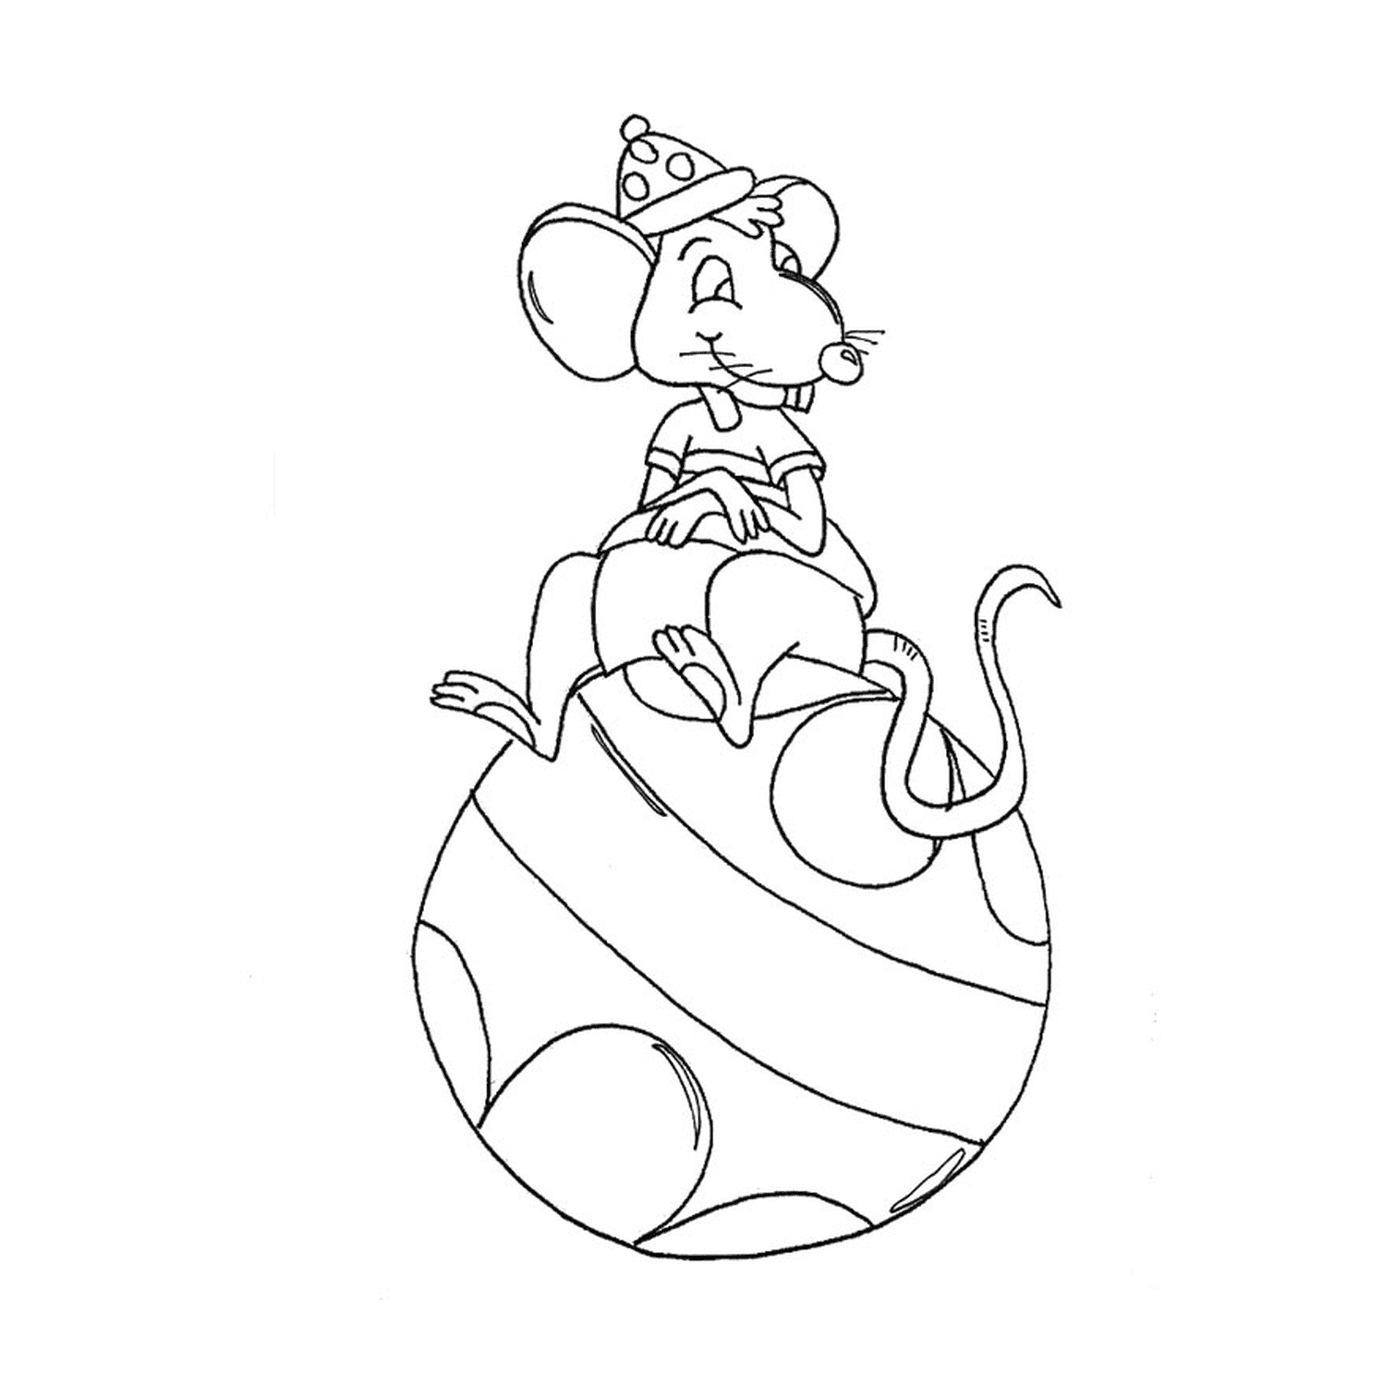  A mouse sitting on a balloon 